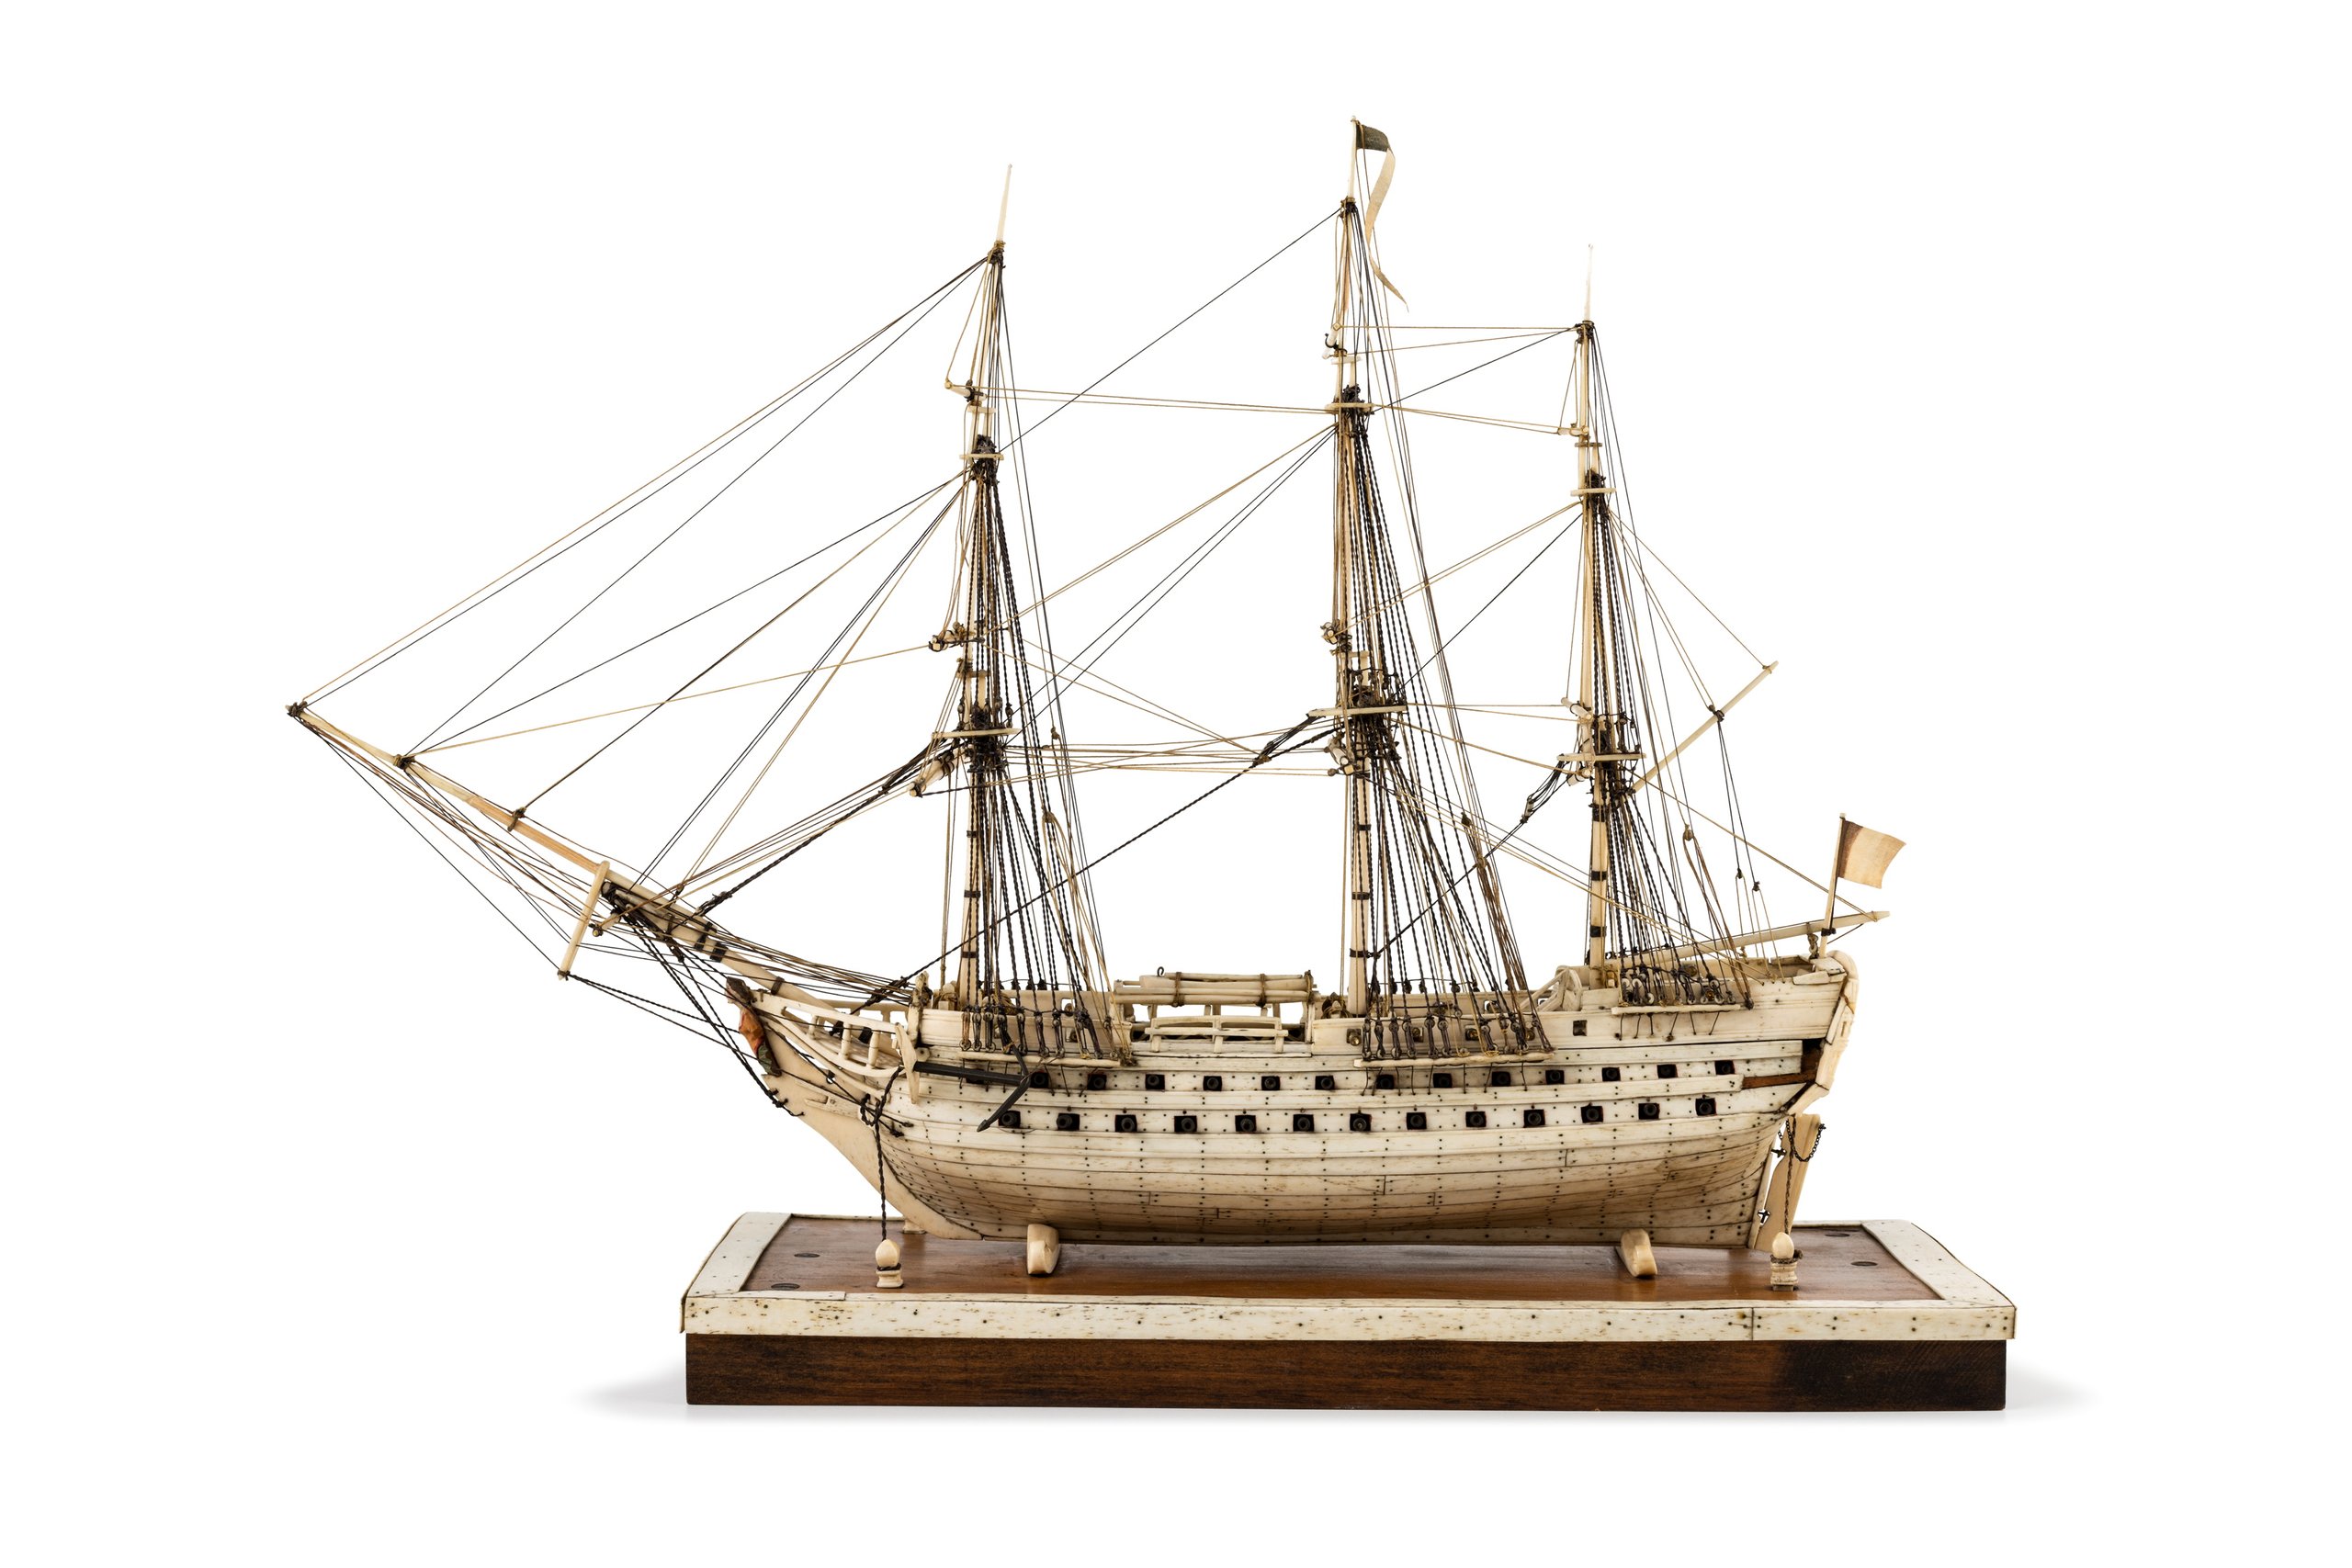 Ship model made by a Napoleonic prisoner-of-war